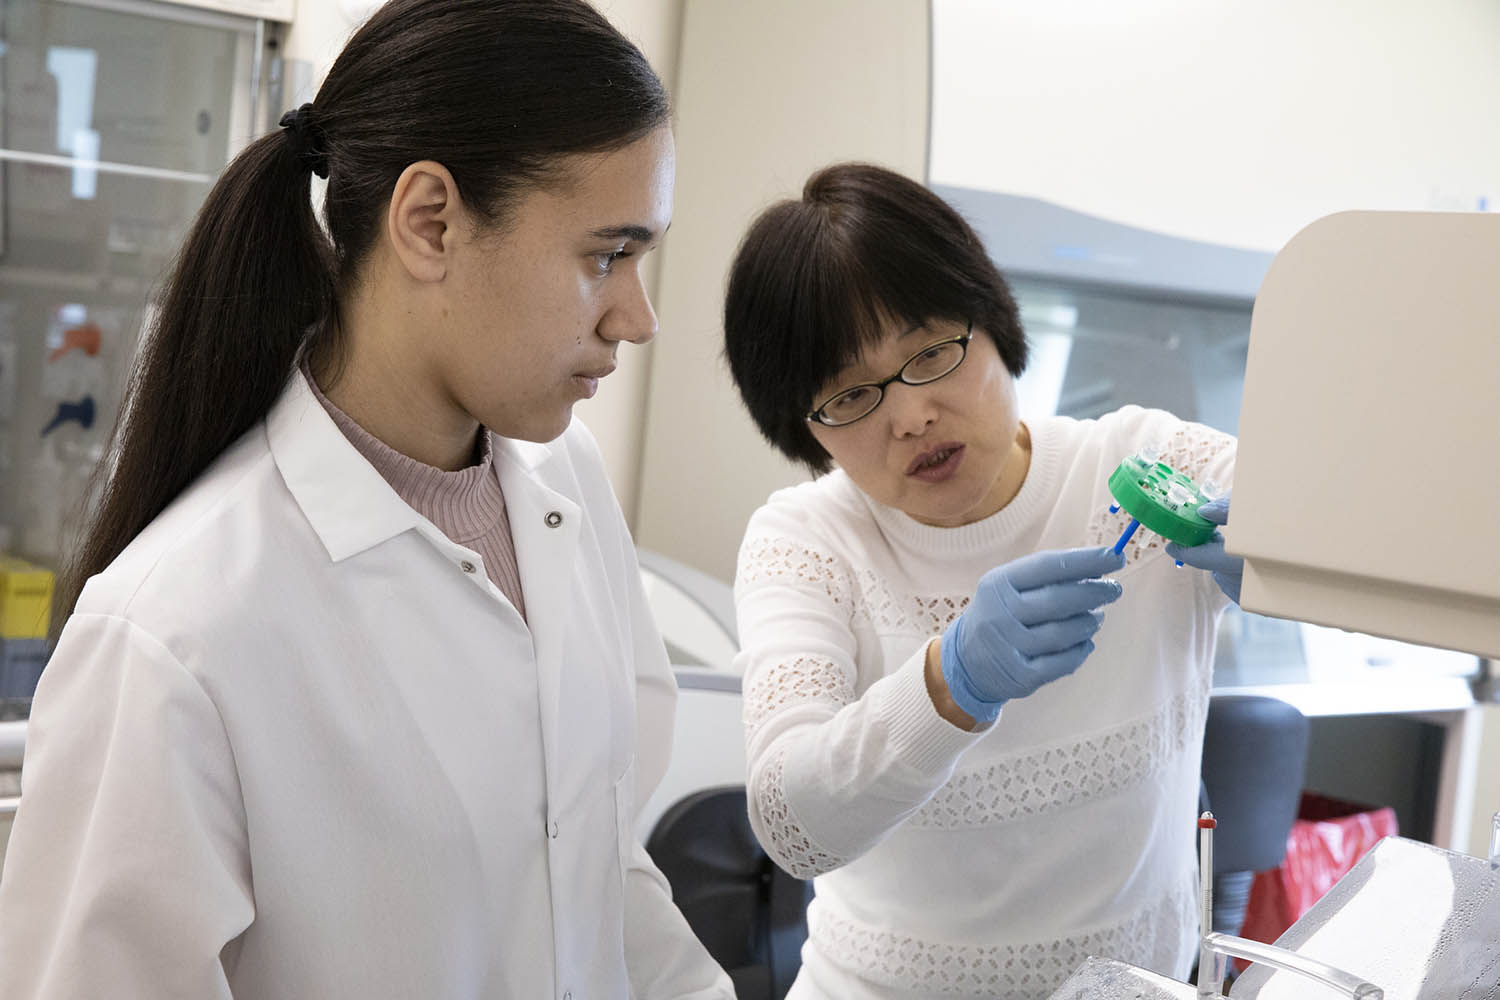 Sha Jin, an associate professor in the Thomas J. Watson School of Engineering and Applied Science’s Department of Biomedical Engineering, works in her lab with student Deana Moffat. Jin was awarded nearly $1.2 million in grants to further her research into diabetes treatments.